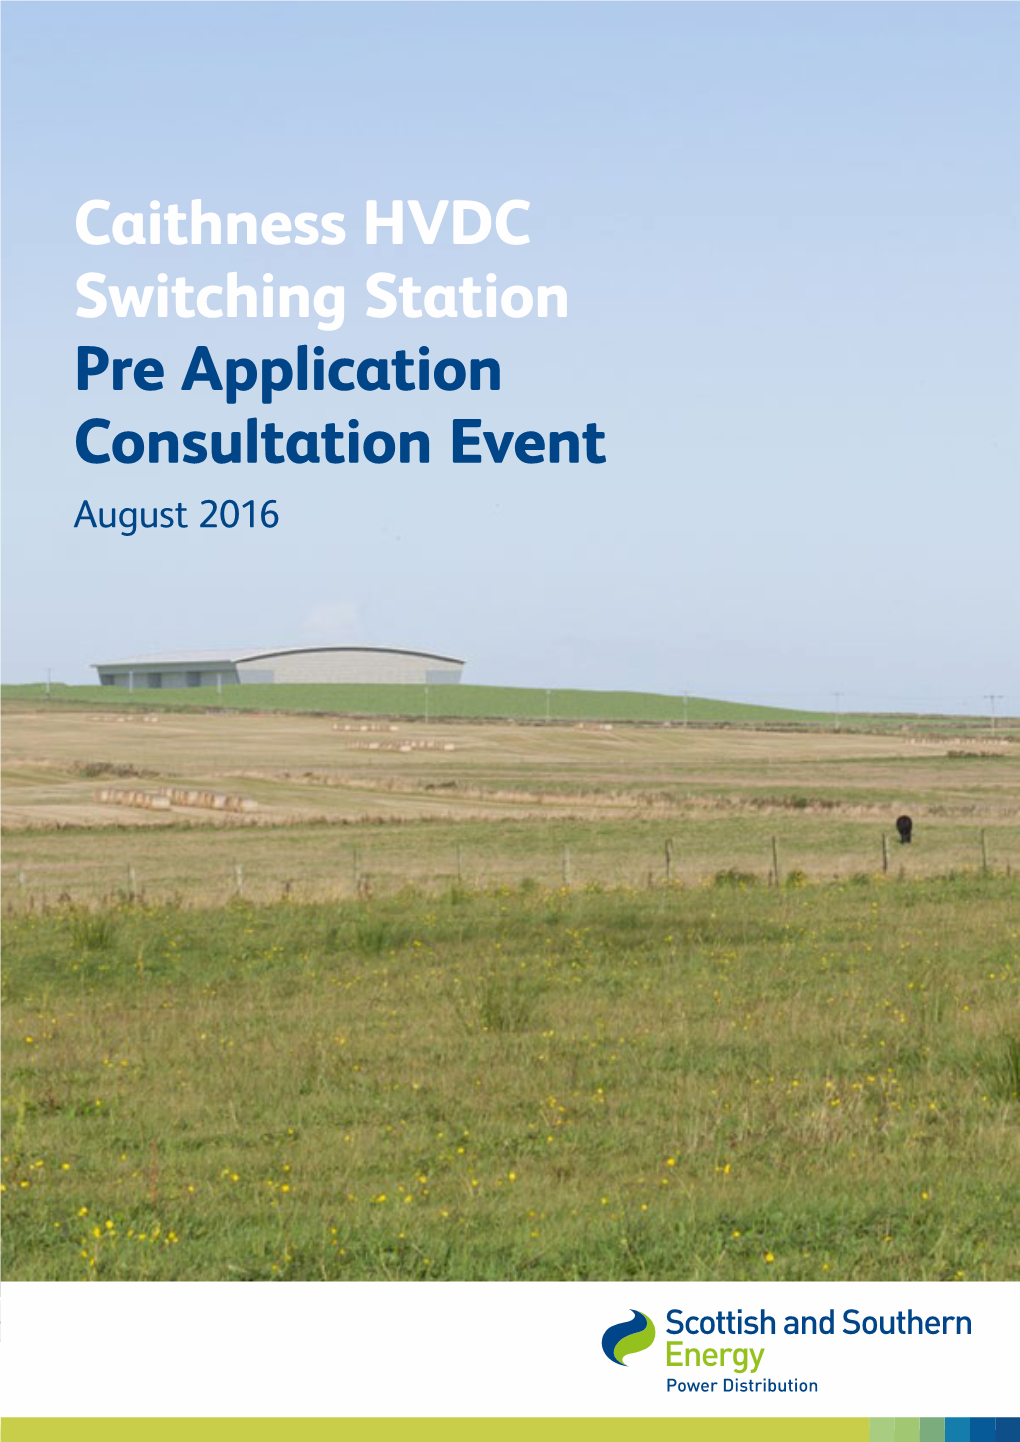 Caithness HVDC Switching Station Pre Application Consultation Event August 2016